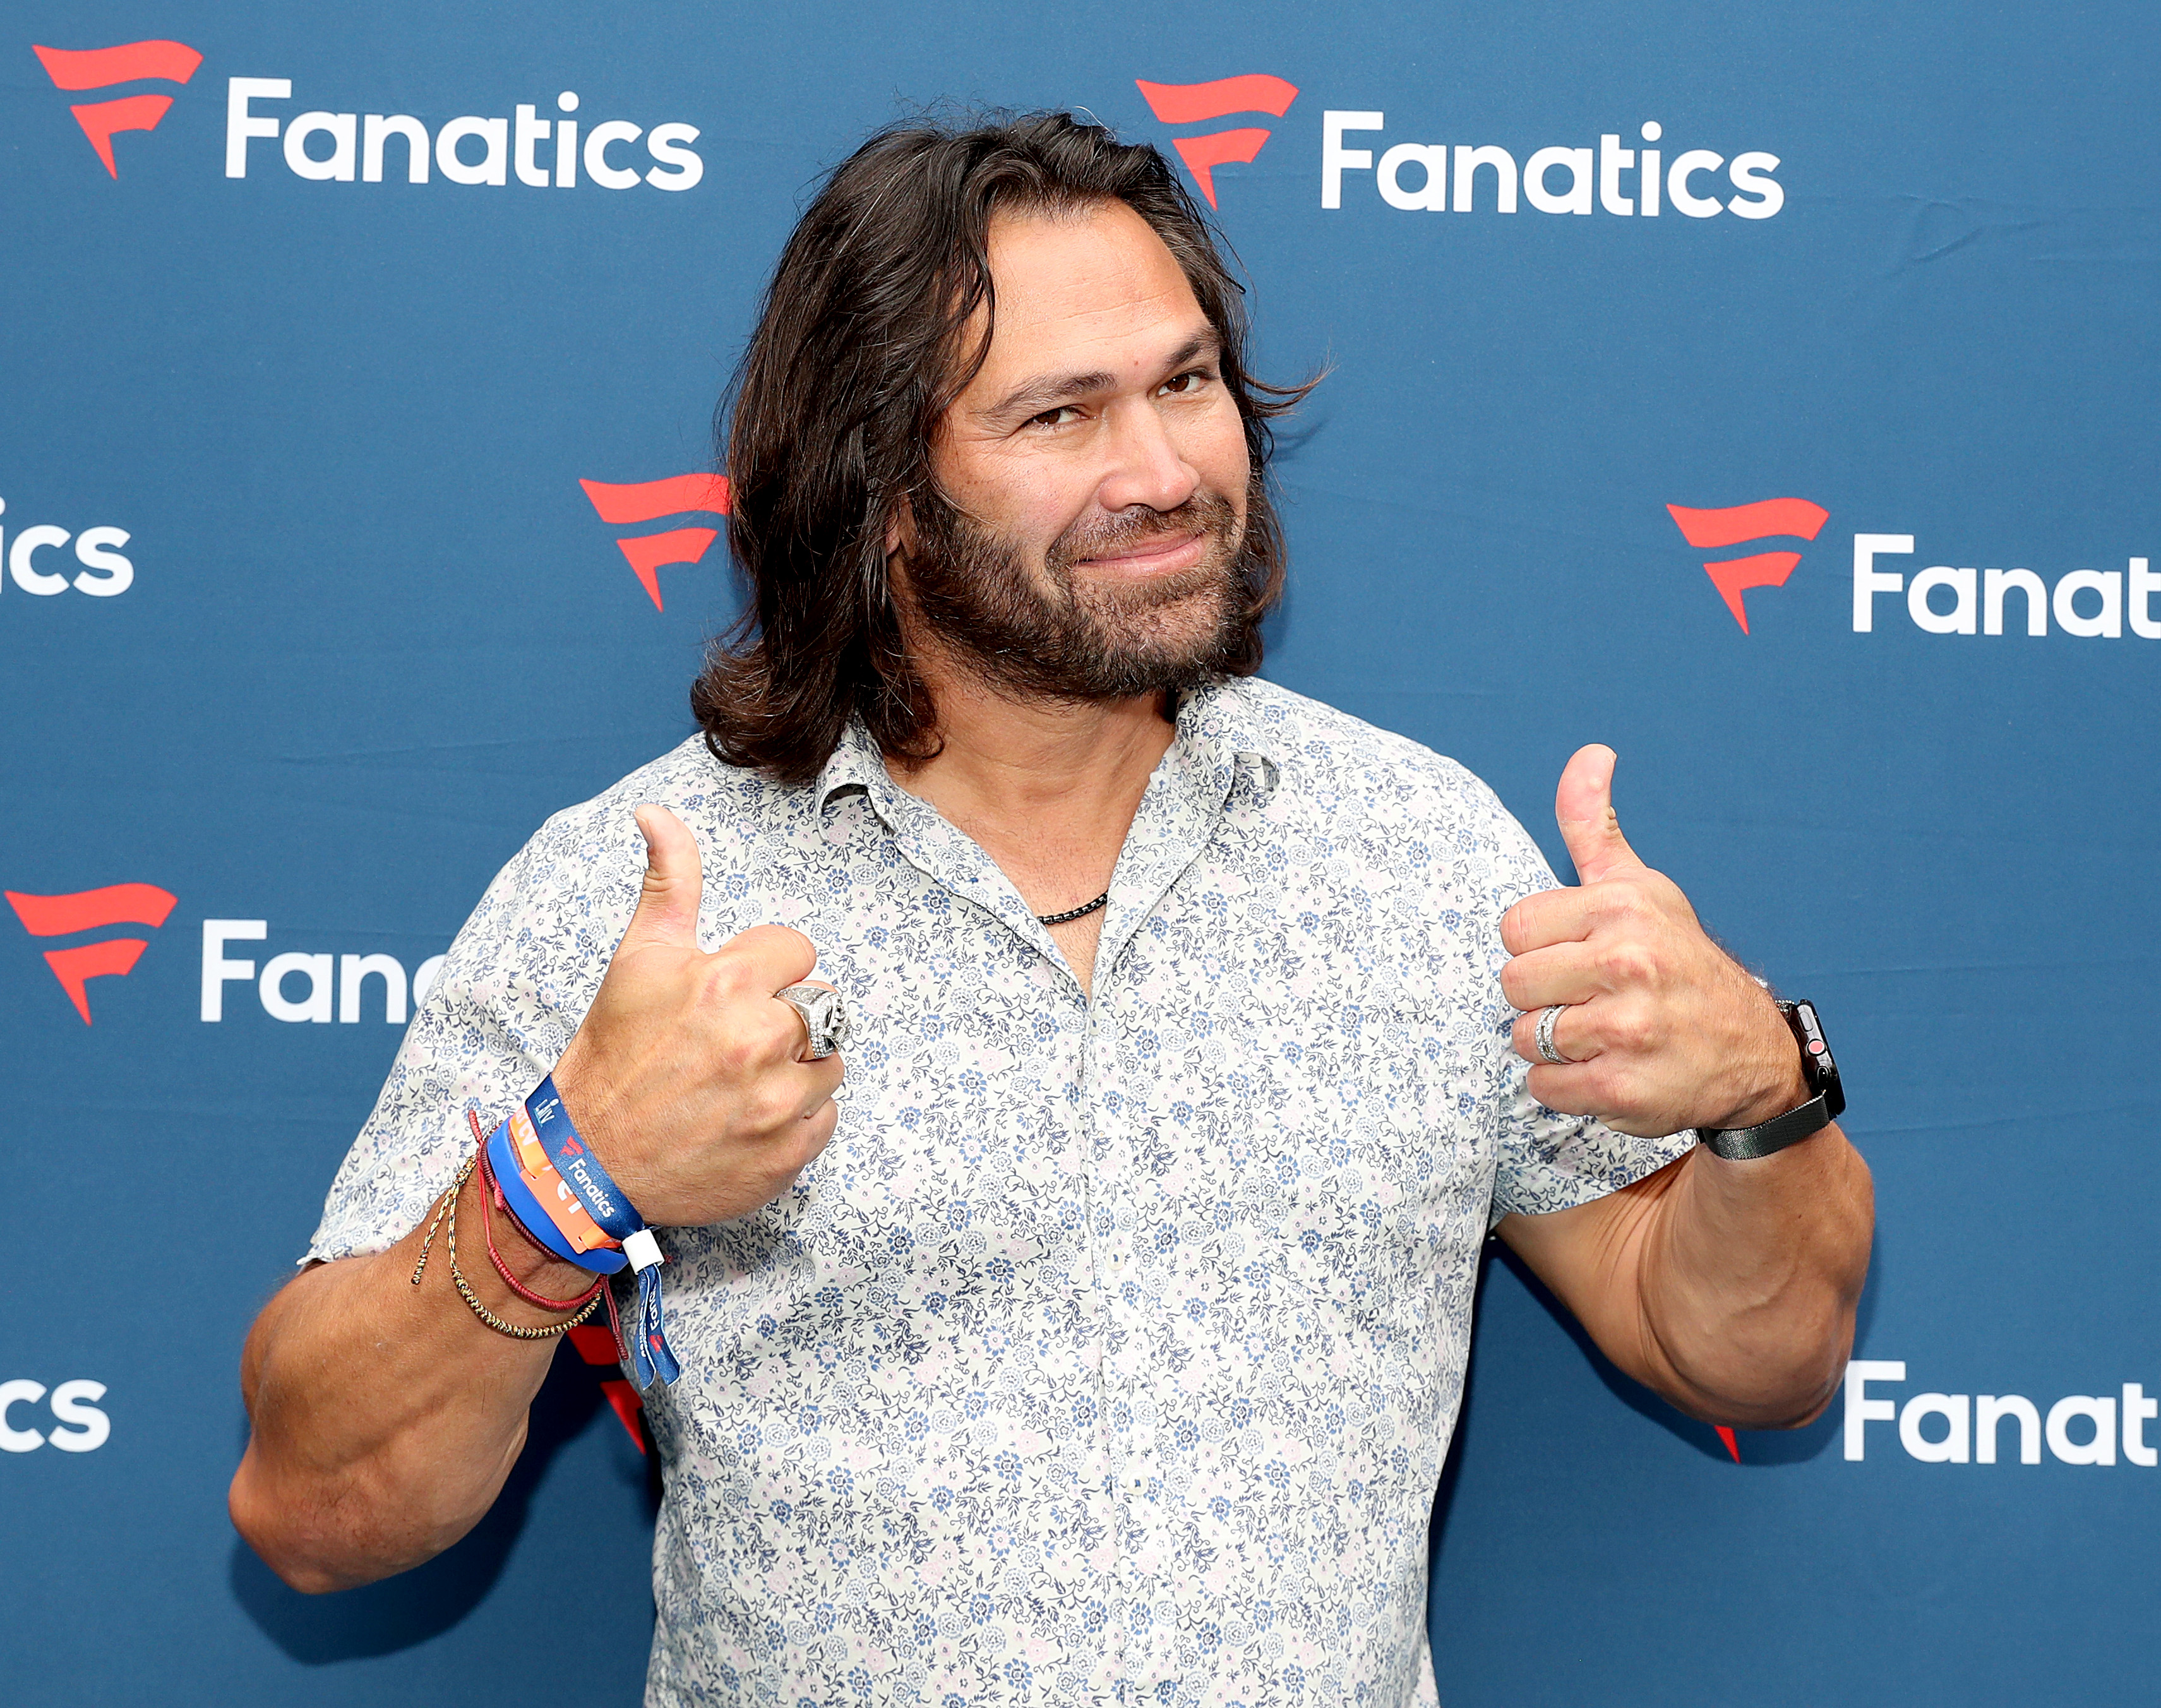 Former Red Sox Johnny Damon needs some hits: Indians Insider